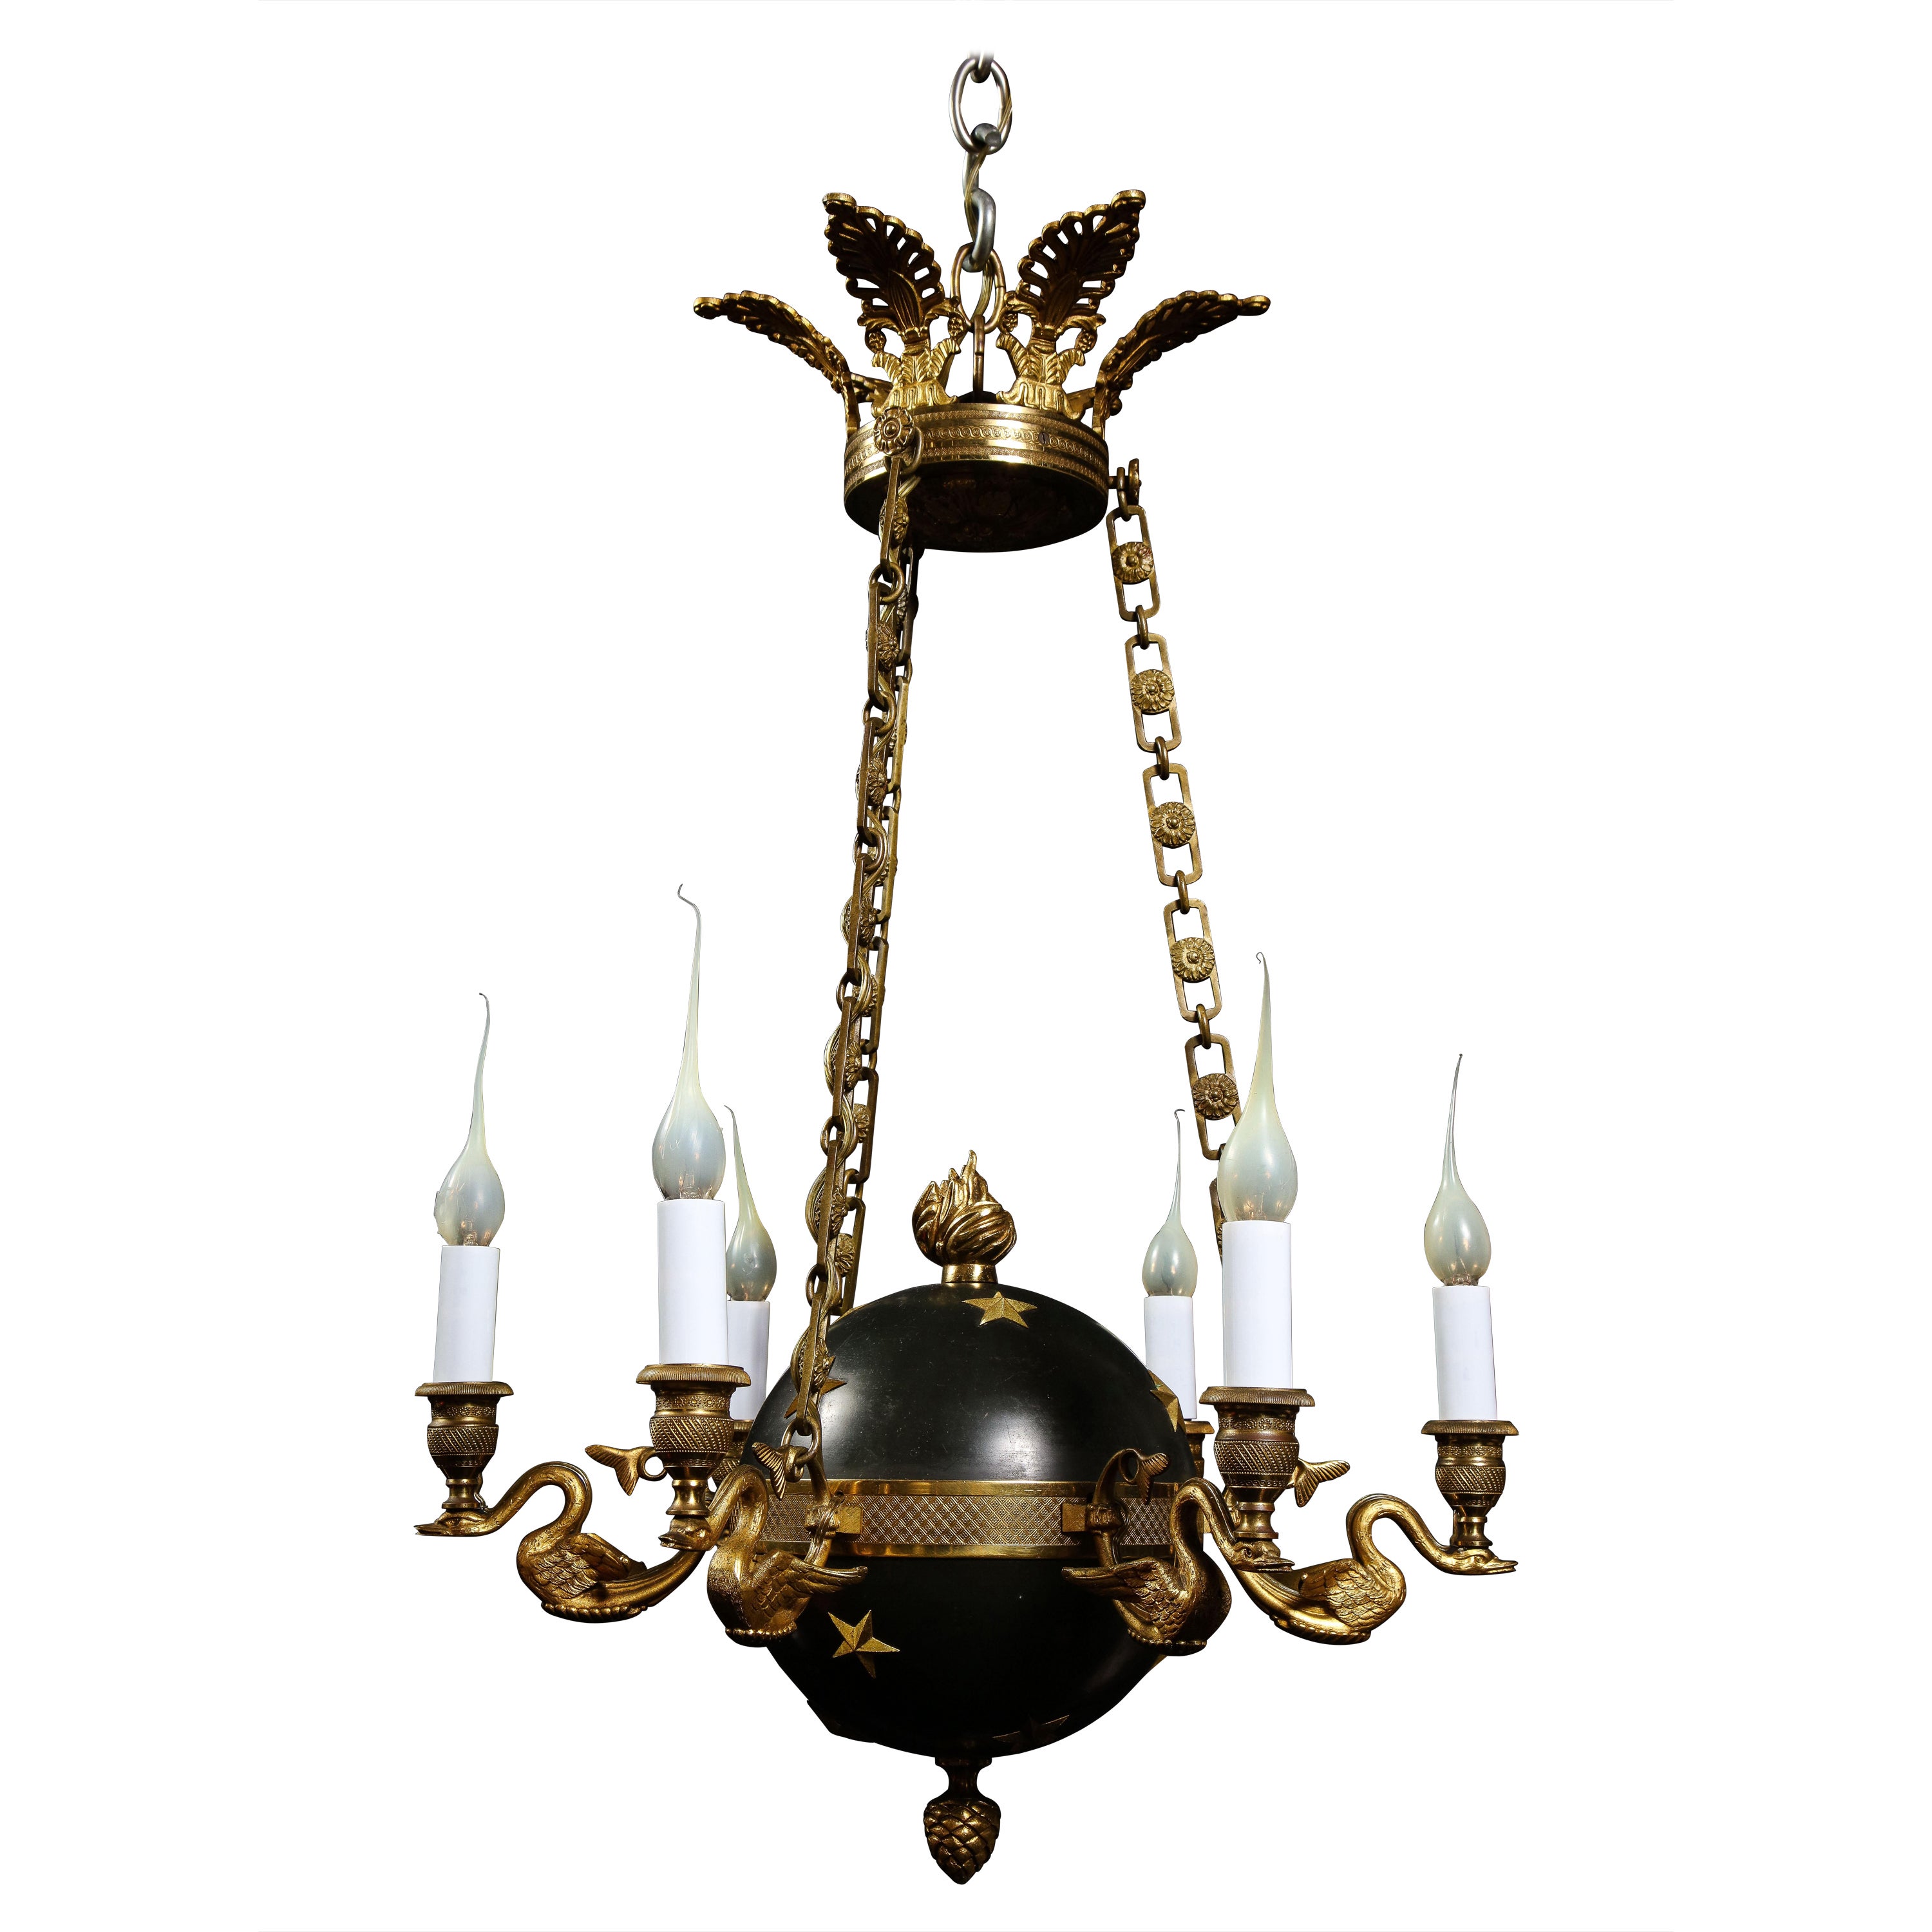 Hollywood Regency Gilt Bronze and Patinated Bronze Ball Form Swan Chandelier For Sale